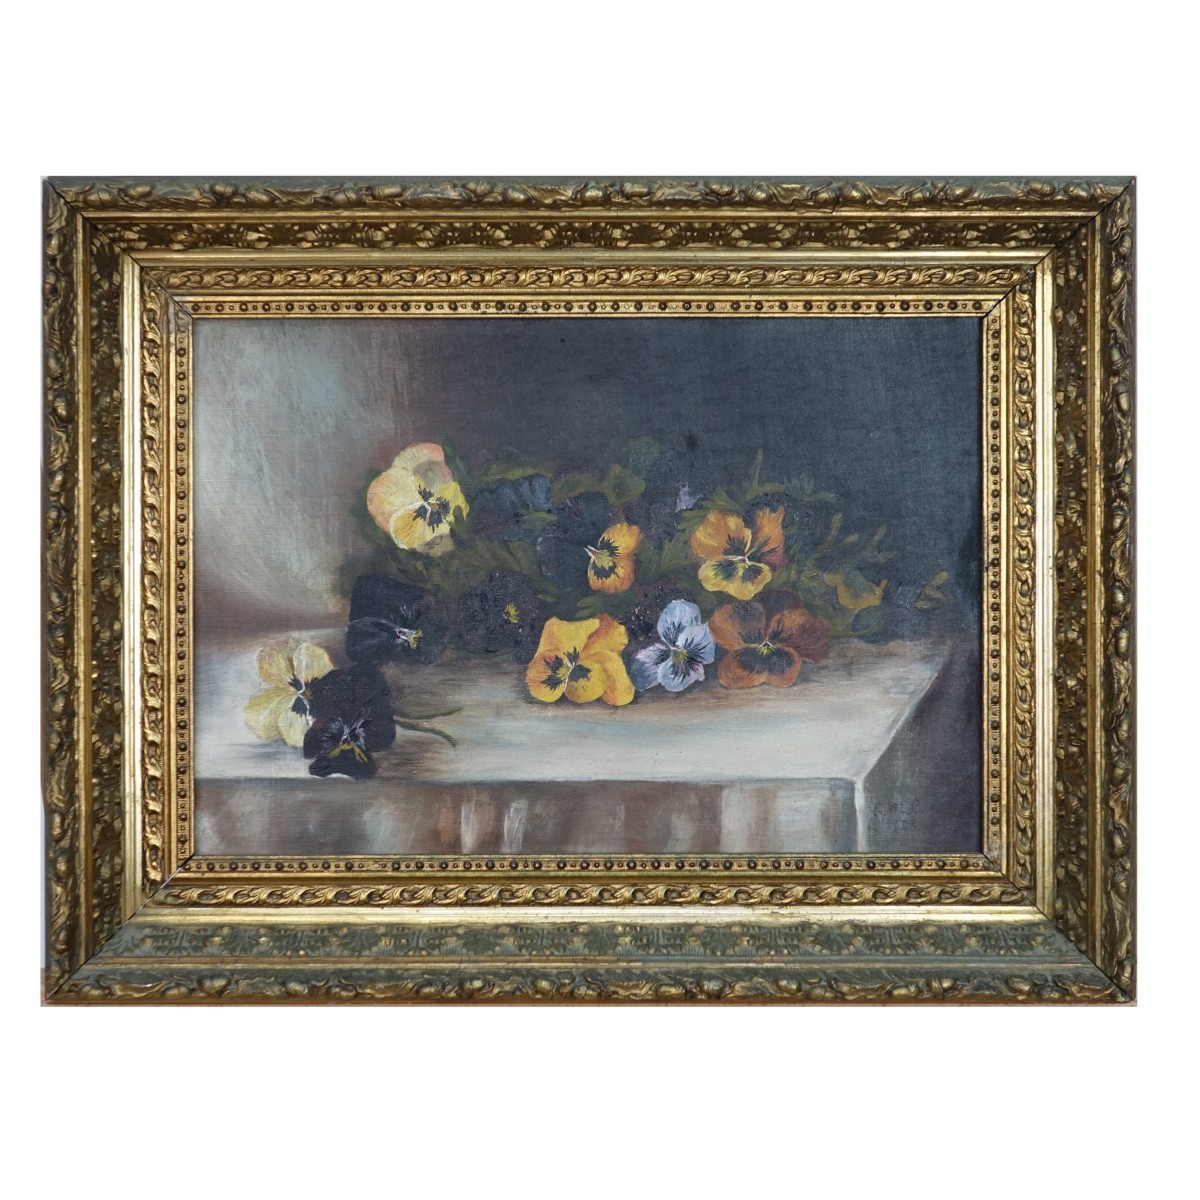 O/C Still Life of Pansies signed E. M. C. "88